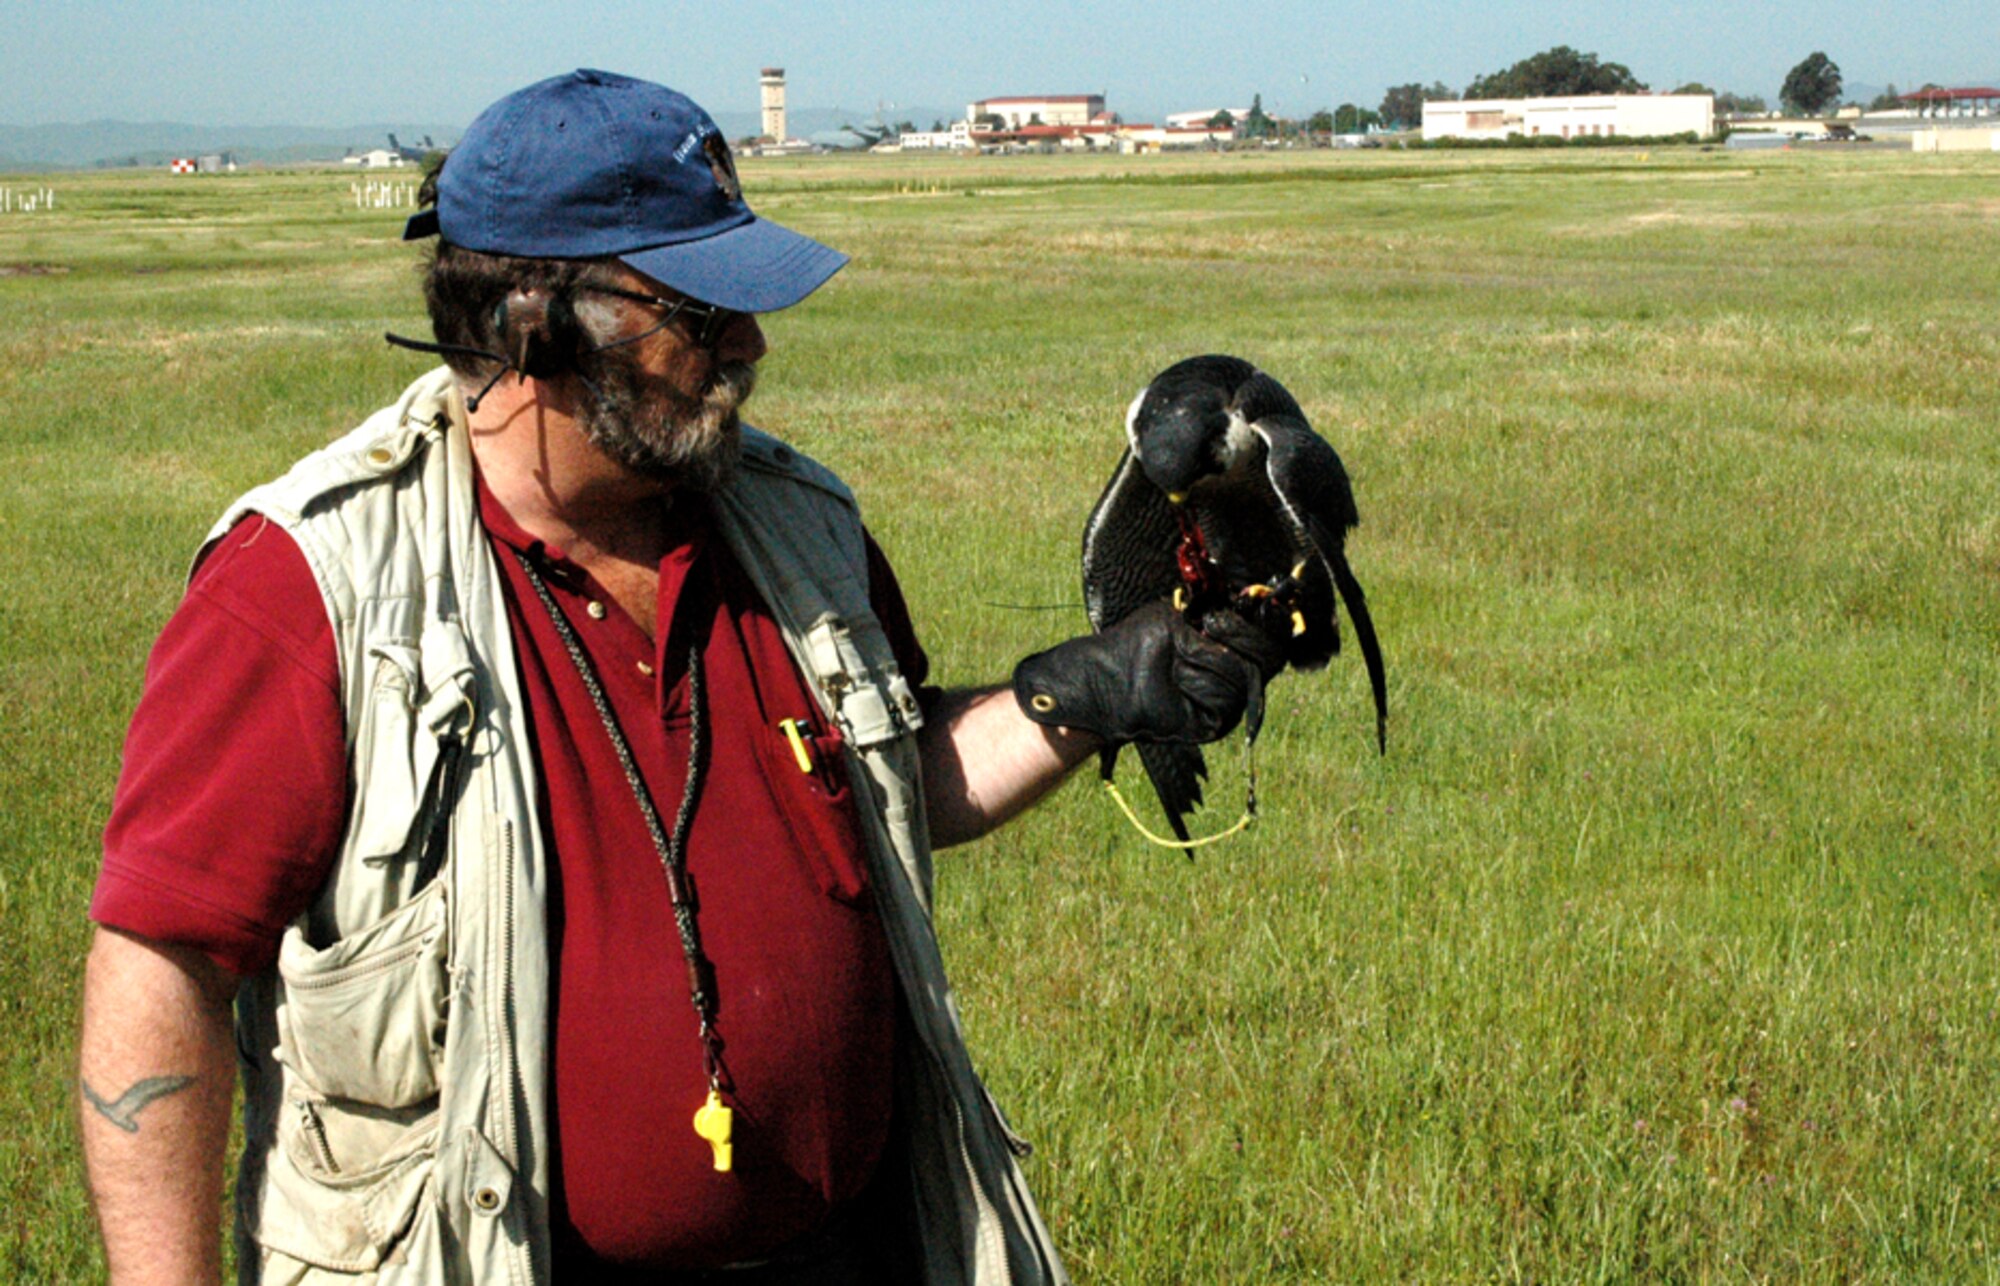 Mr. Greg Burdick gives Austin some quail after completing his practice flight.  The WBS purchases quail from a local breeder who raises them for consumption. Quail are natural prey for the falcons. (U.S. Air Force photo by Staff Sgt. Raymond Hoy)

